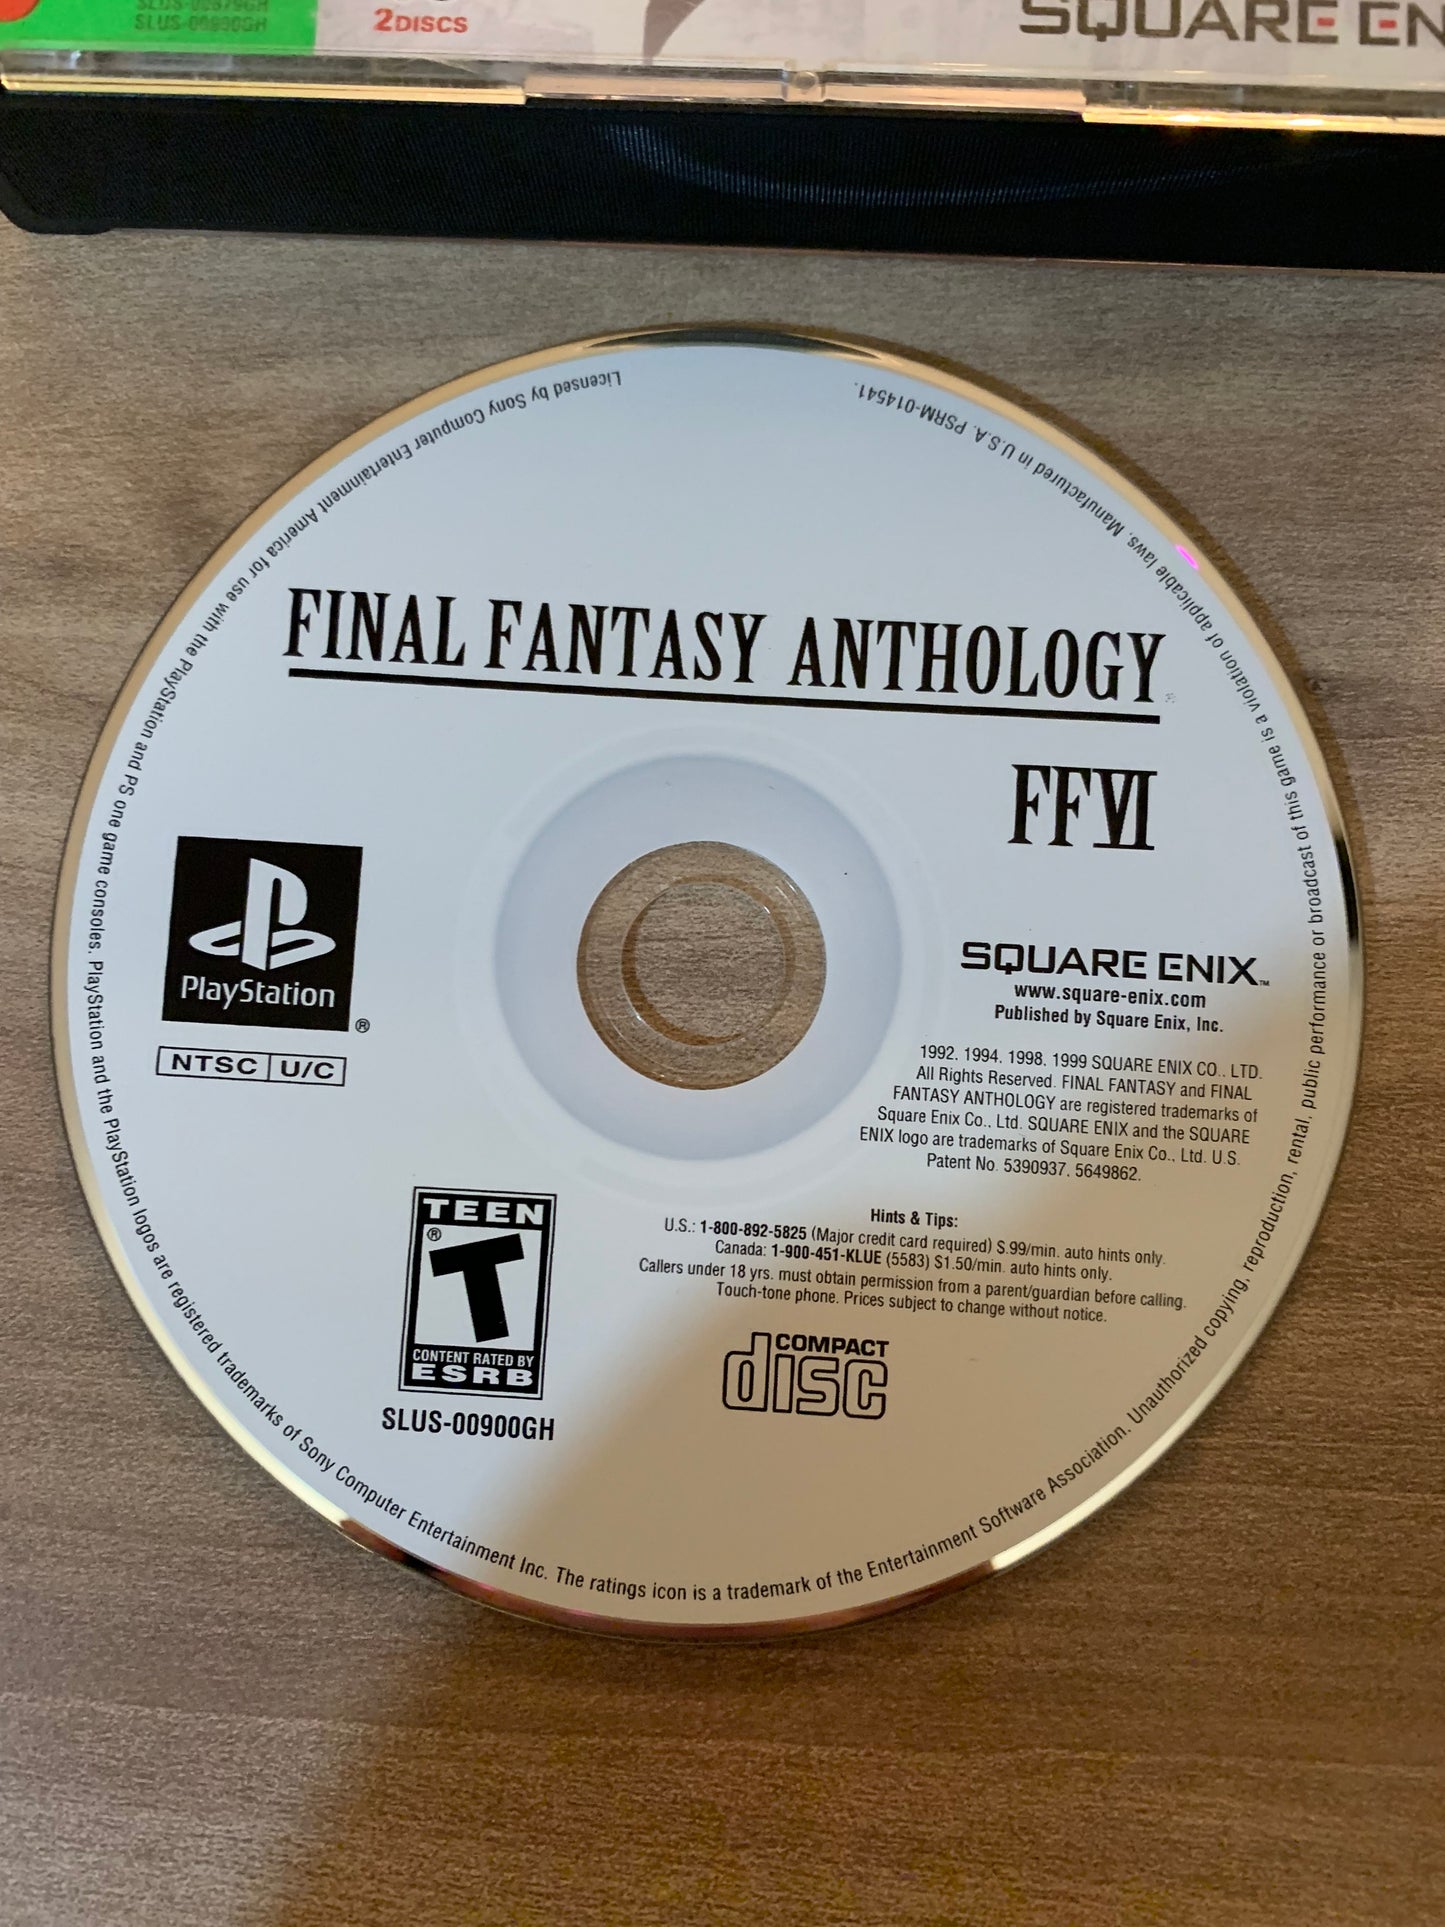 SONY PLAYSTATiON [PS1] | FiNAL FANTASY ANTHOLOGY | GREATEST HiTS